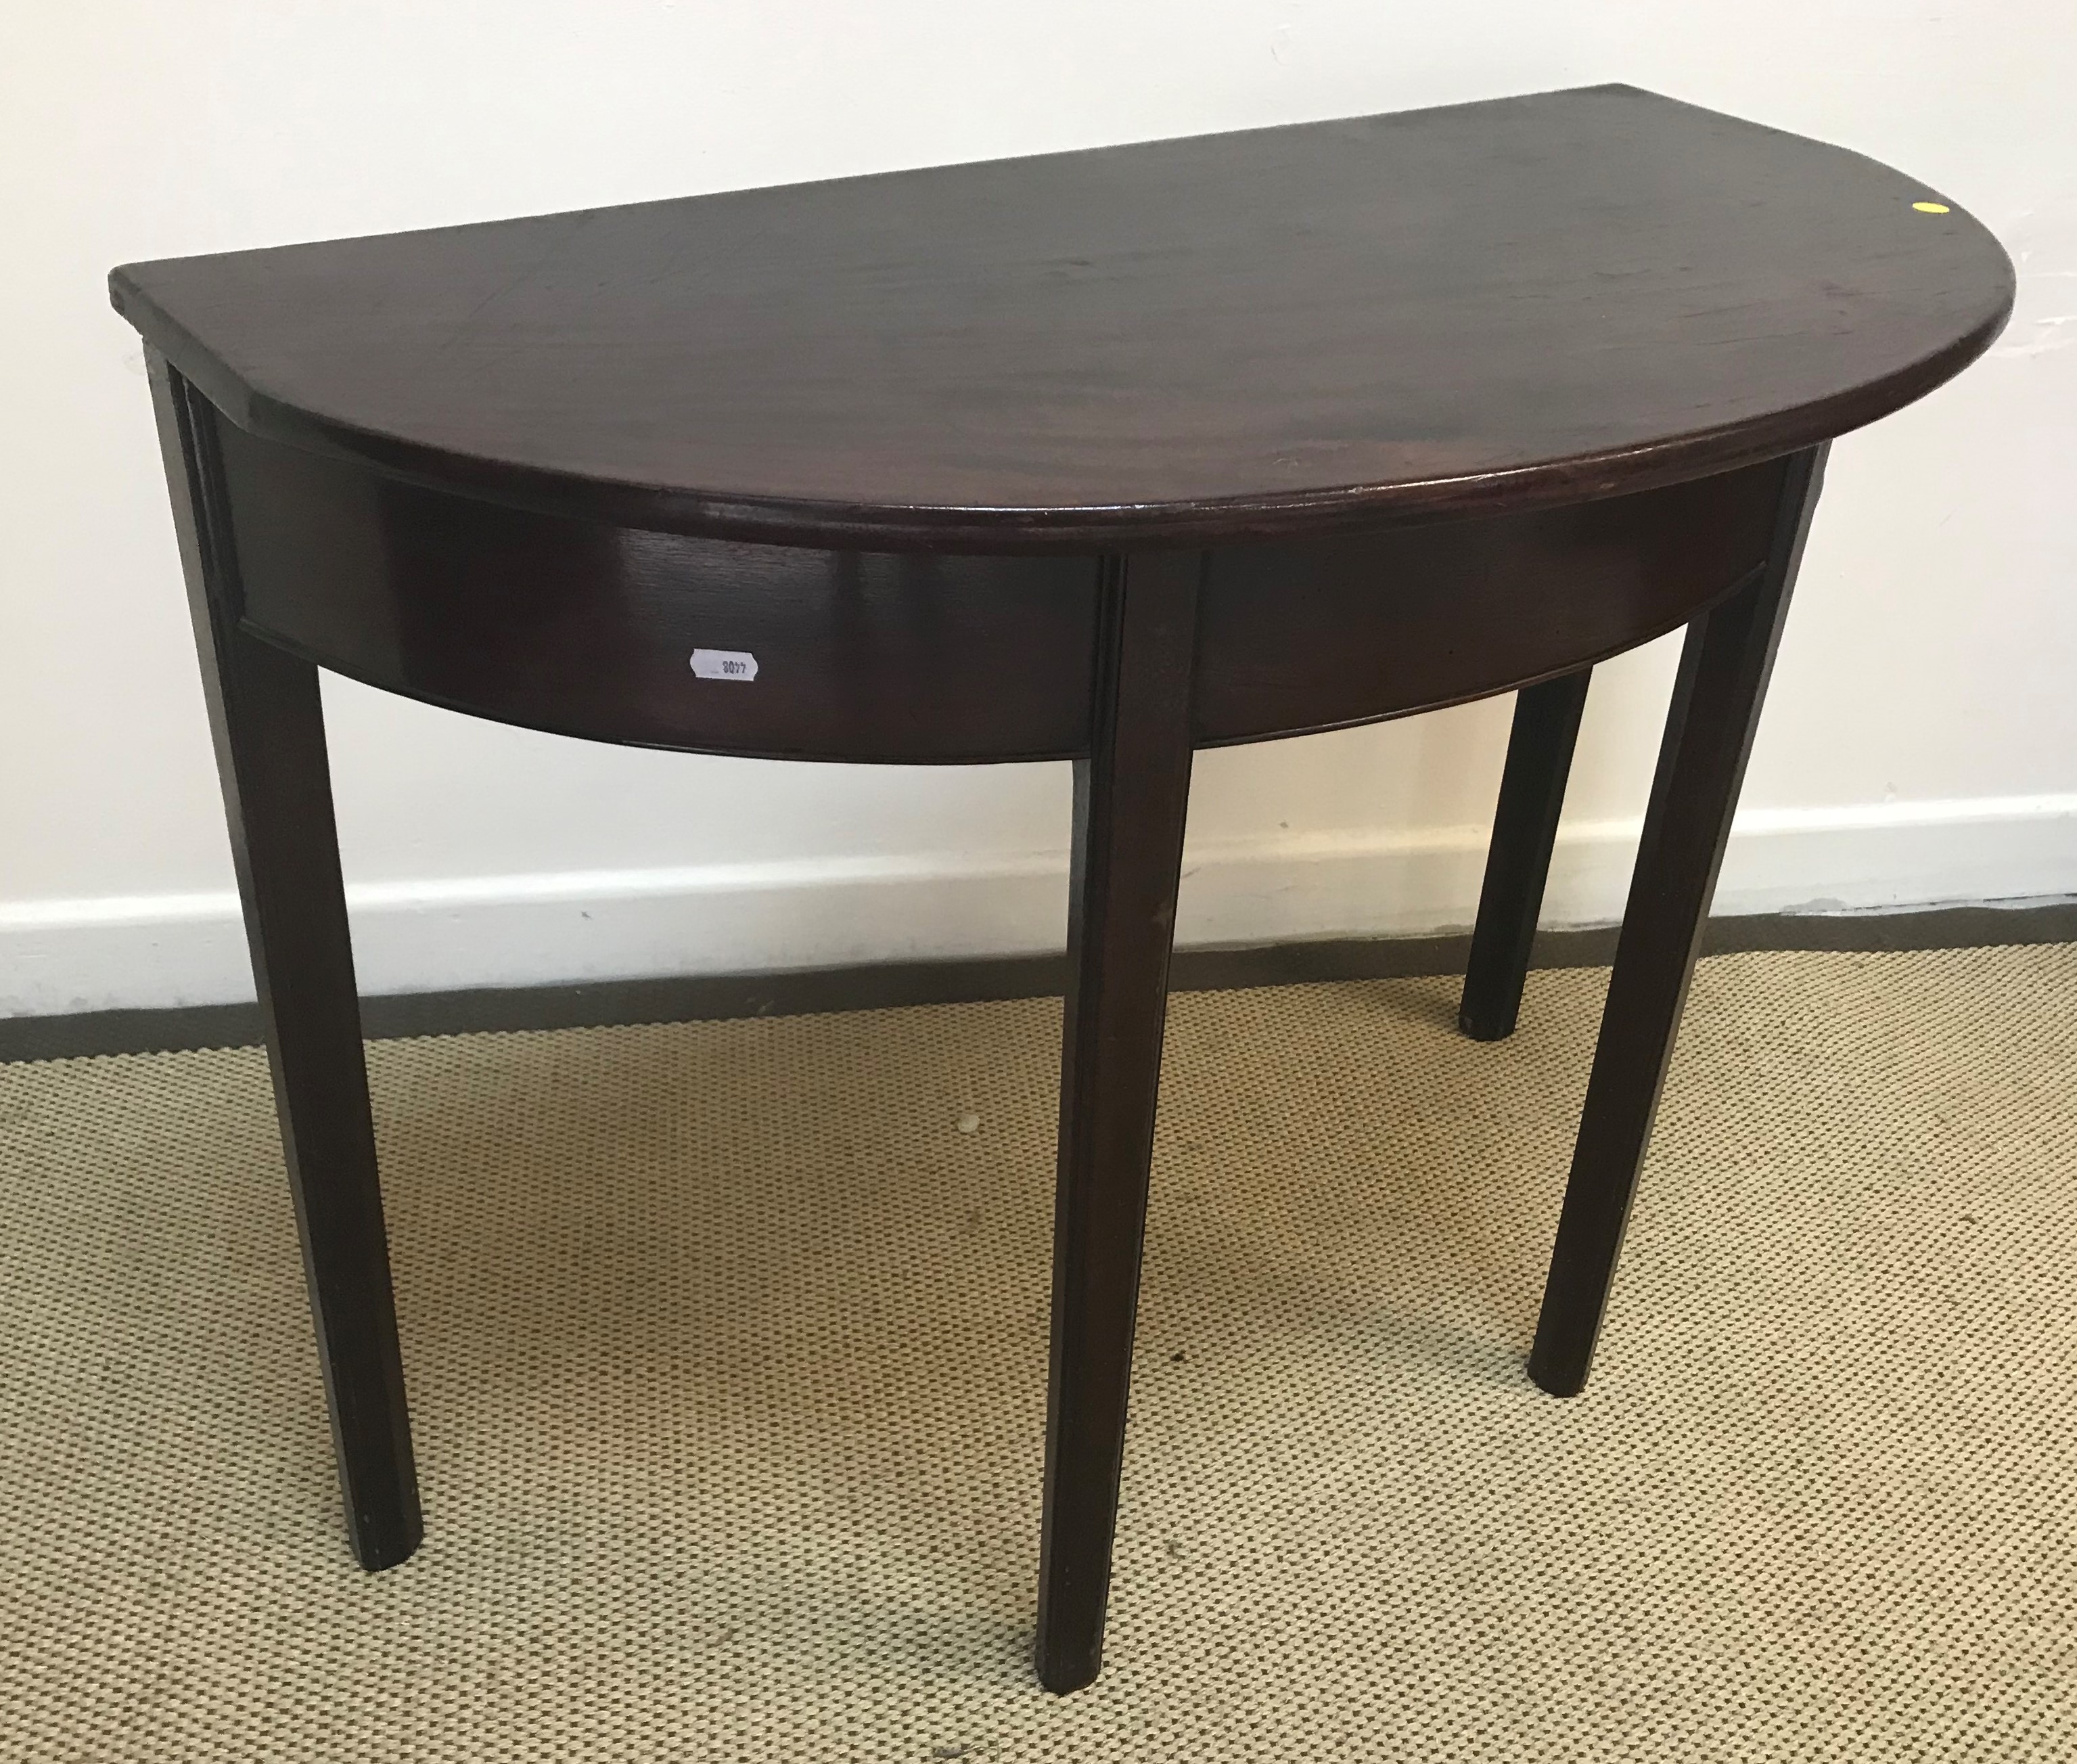 Two mahogany demi-lune side tables, one with cross-banded top on square tapered legs, - Image 2 of 2